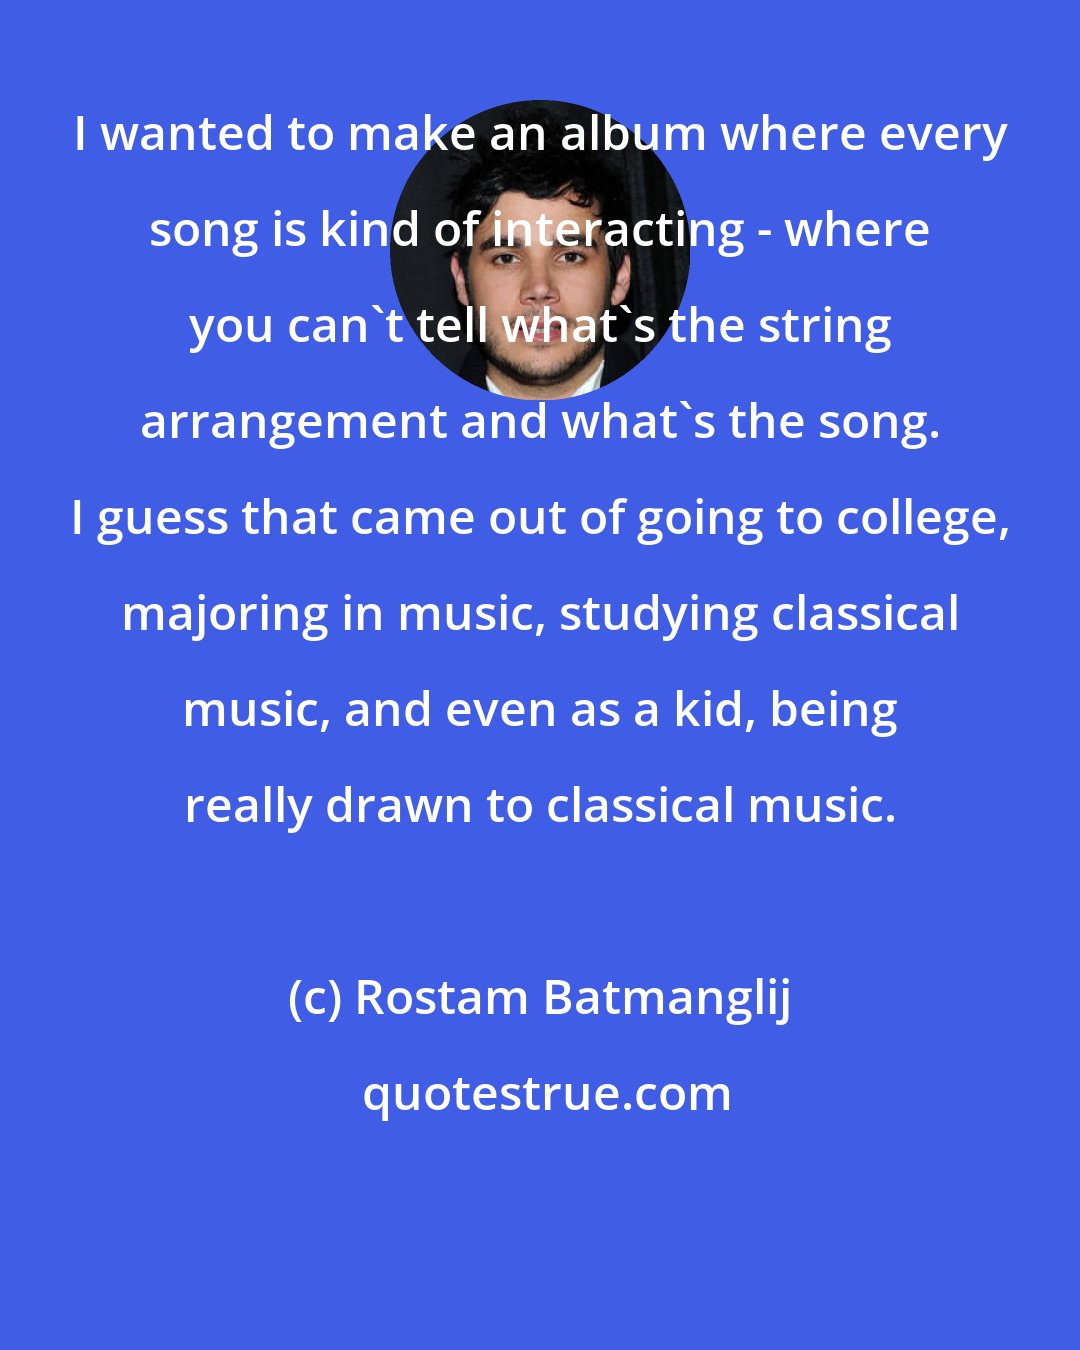 Rostam Batmanglij: I wanted to make an album where every song is kind of interacting - where you can't tell what's the string arrangement and what's the song. I guess that came out of going to college, majoring in music, studying classical music, and even as a kid, being really drawn to classical music.